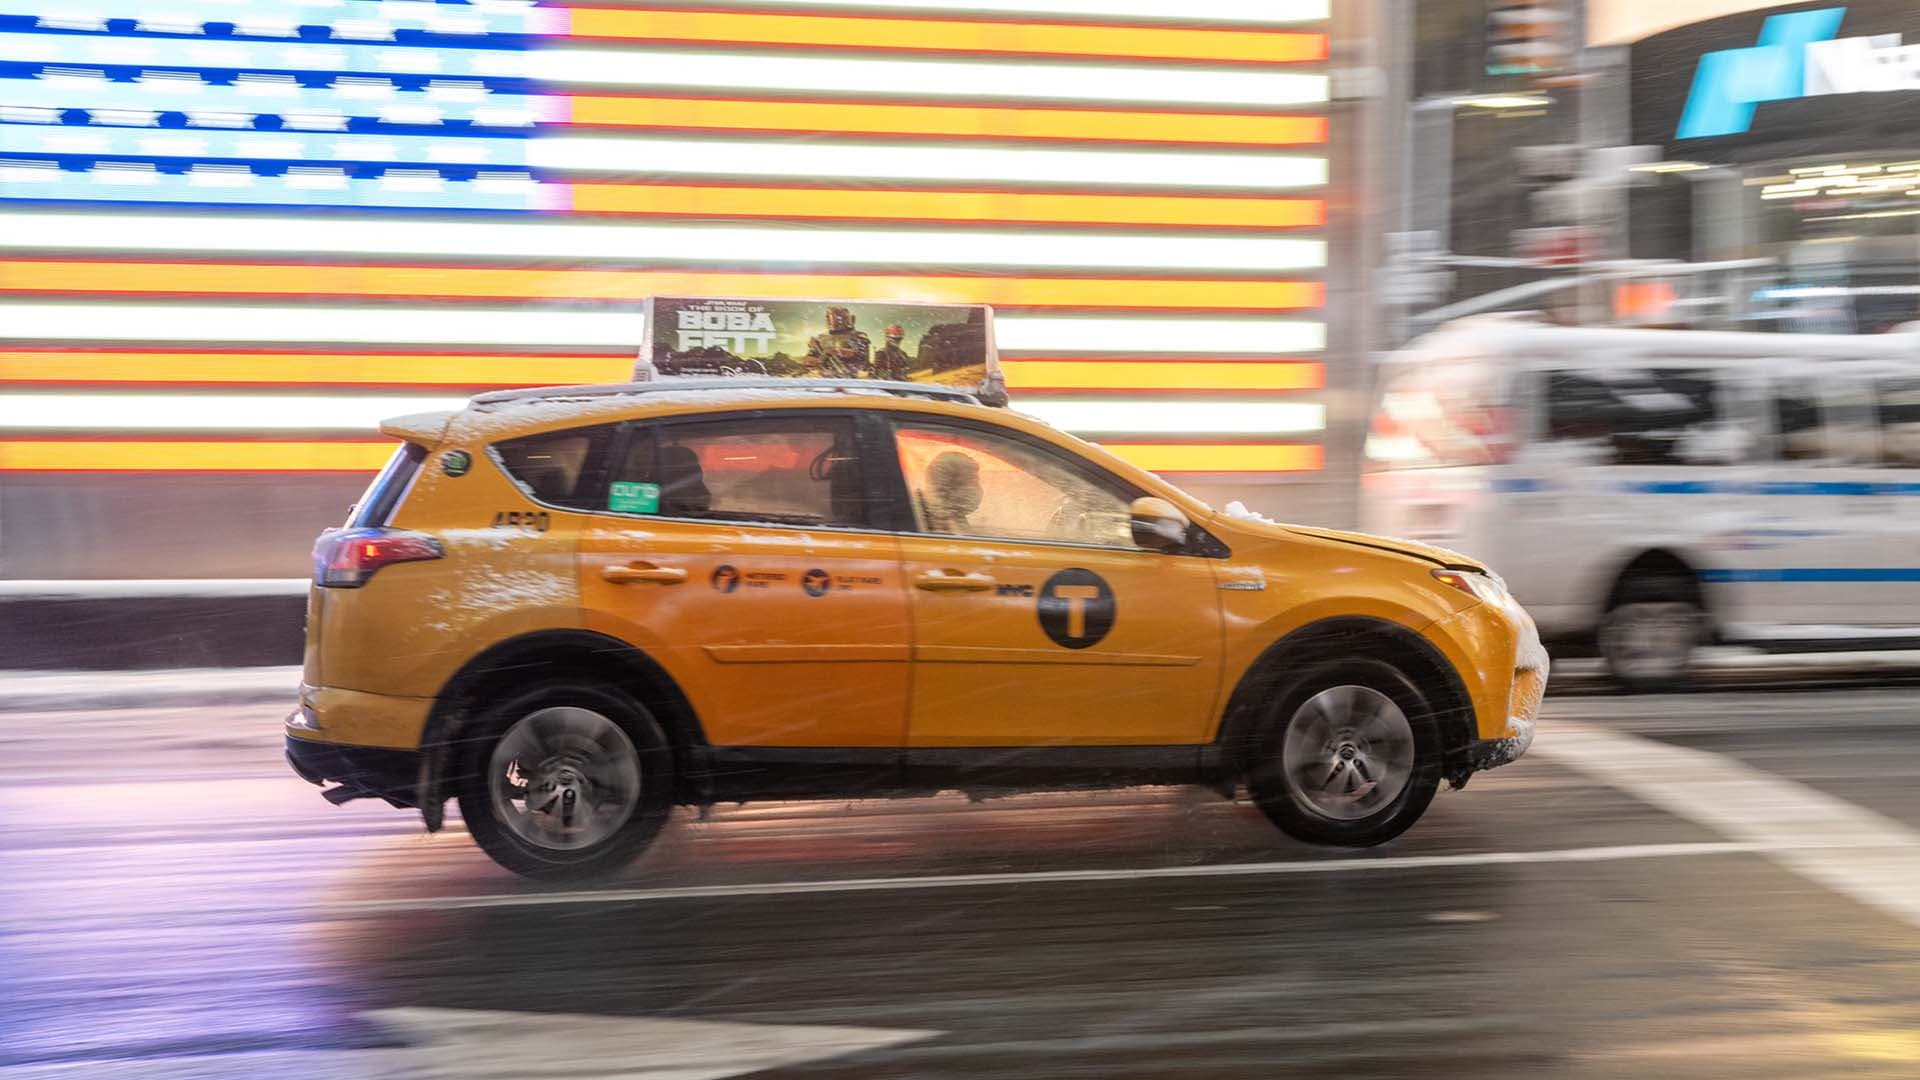 Uber Is Adding NYC’s Yellow Taxis to Its App, And It’s Not Stopping There